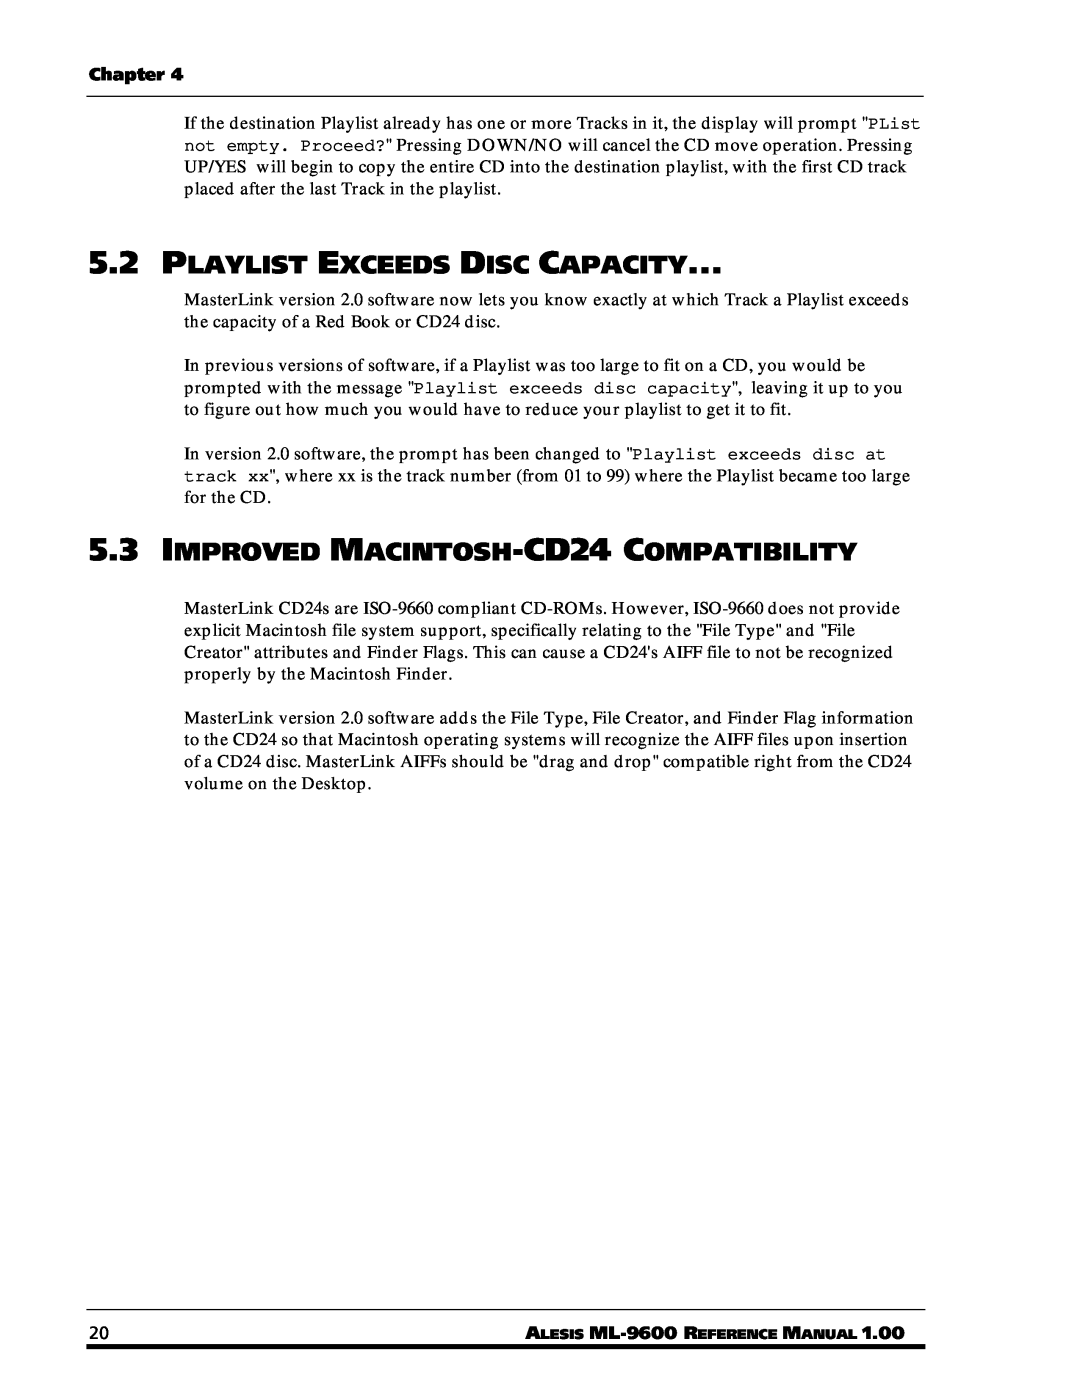 Alesis ML-9600 owner manual 5.2PLAYLIST EXCEEDS DISC CAPACITY, 5.3IMPROVED MACINTOSH-CD24COMPATIBILITY, Chapter 